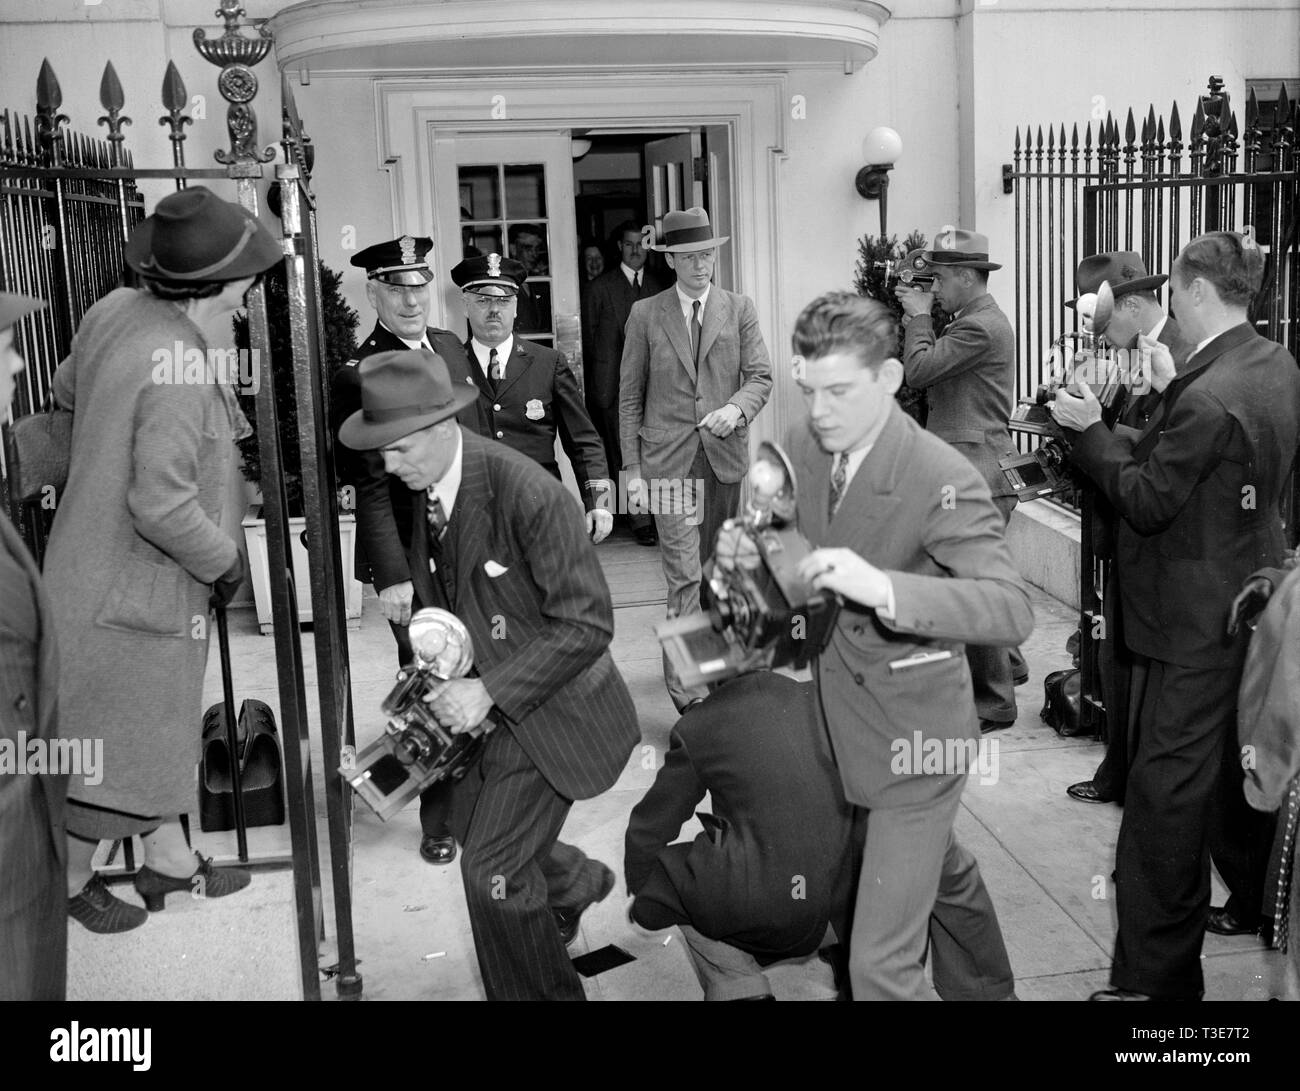 Camera-shy Col. Charles A. Lindbergh leaving the White House walking through Photographer's gauntlet ca. April 20, 1939 Stock Photo